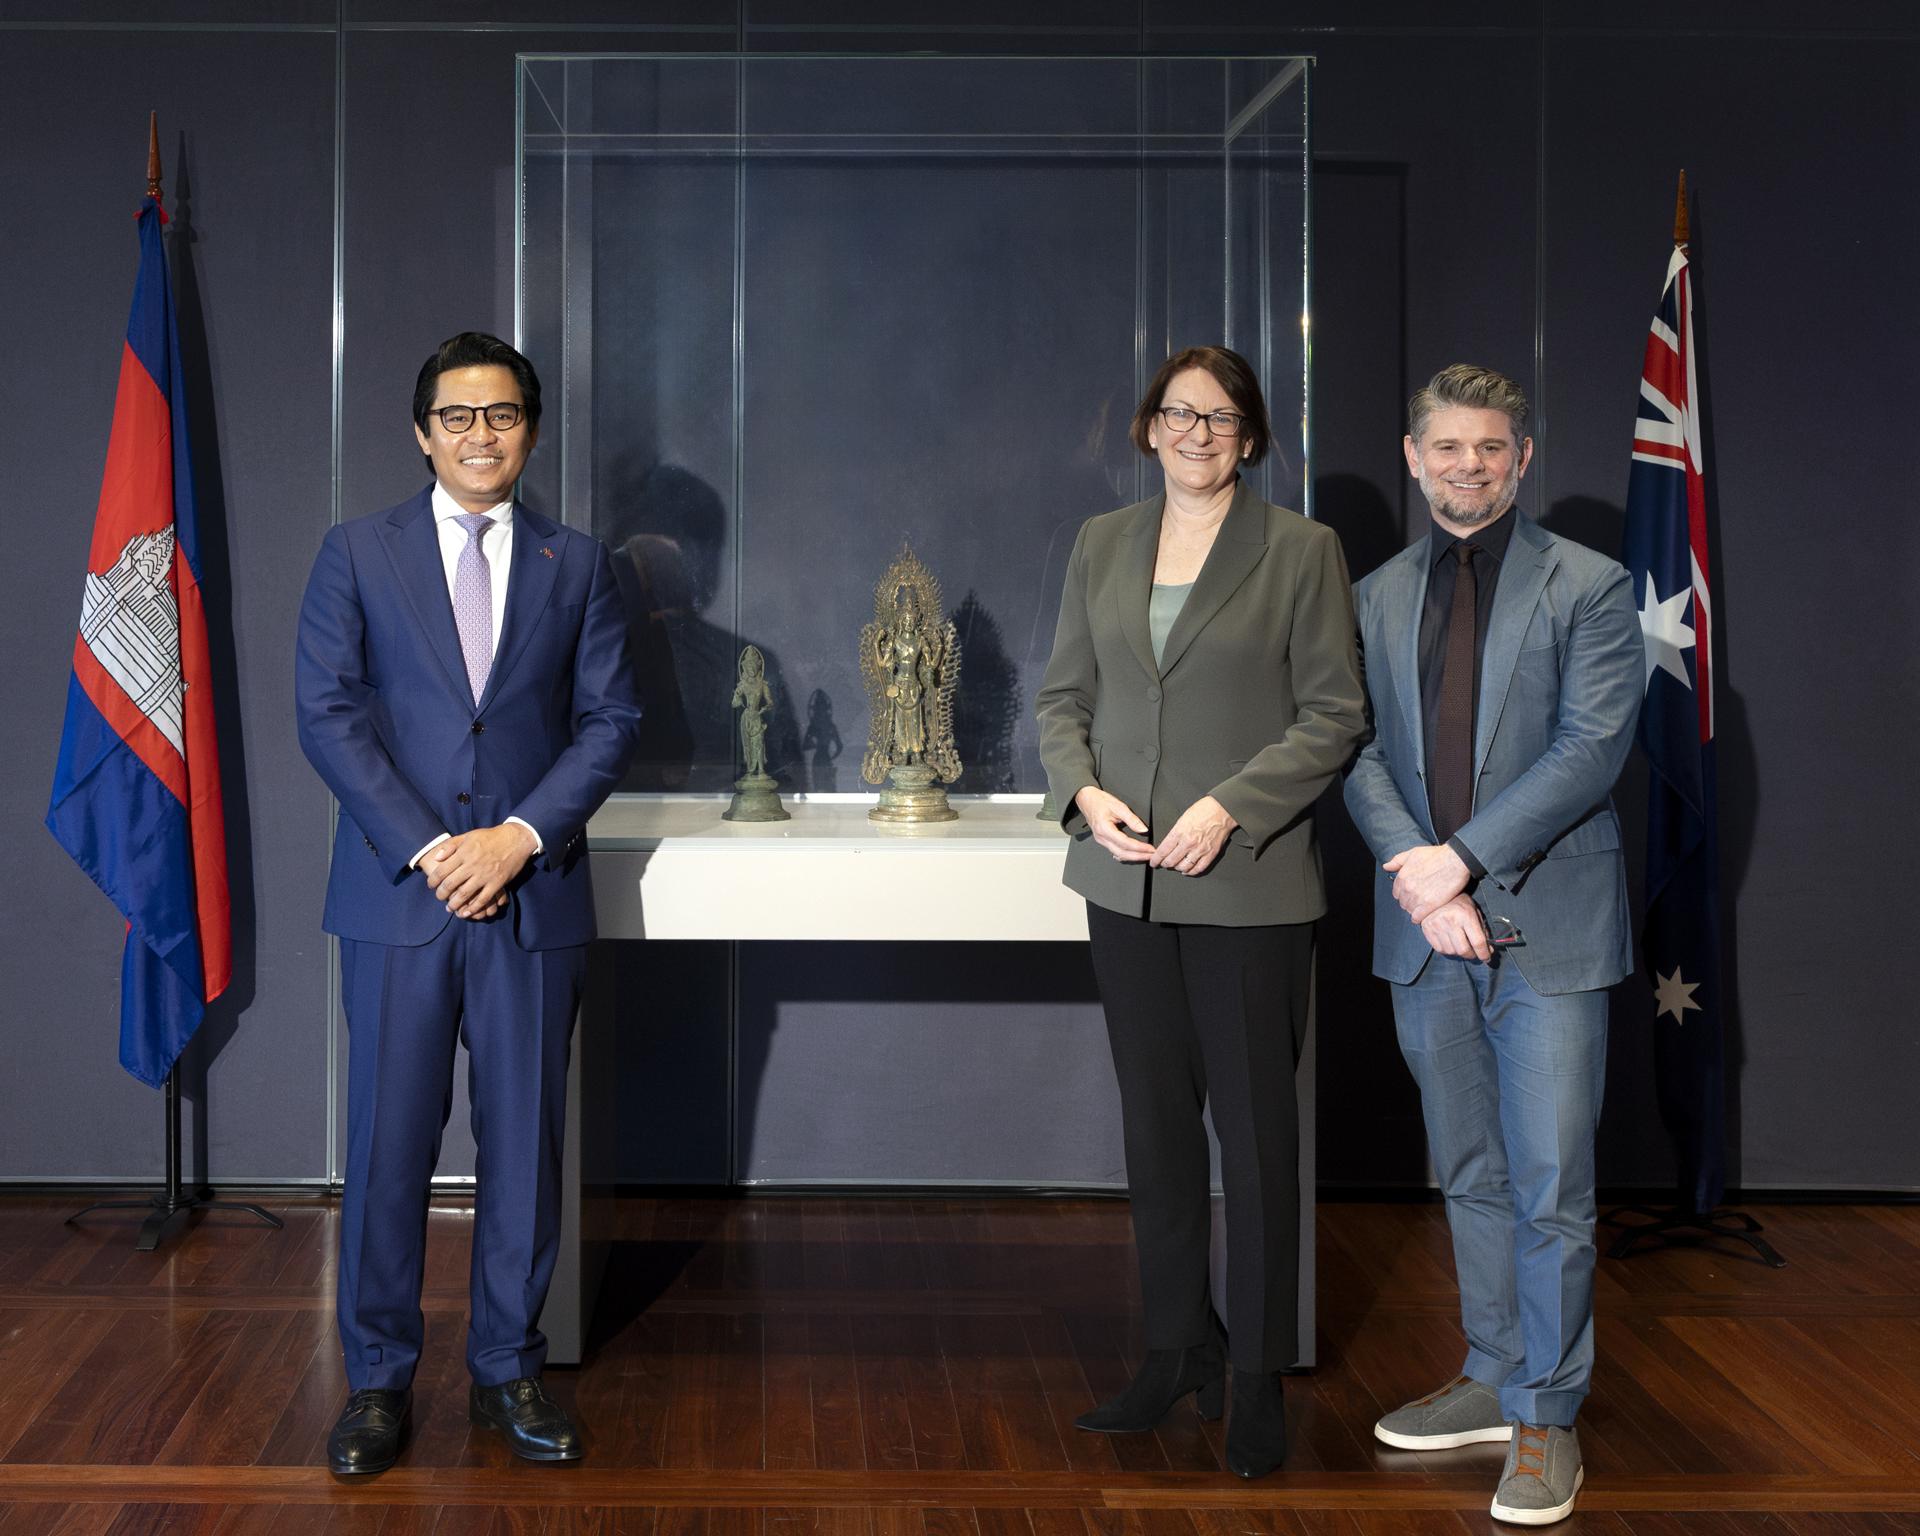 A handout photo shows (L-R) Ambassador HE Dr Cheunboran Chanborey, Director Nick Mitzevich, and Ms Susan Templeman MP pictured with 'Bodhisattva Avalokiteshvara with attendants' at the National Gallery of Australia, Kamberri/Canberra, 2023. EFE/HANDOUT/Karlee Holland/National Gallery of Australia
